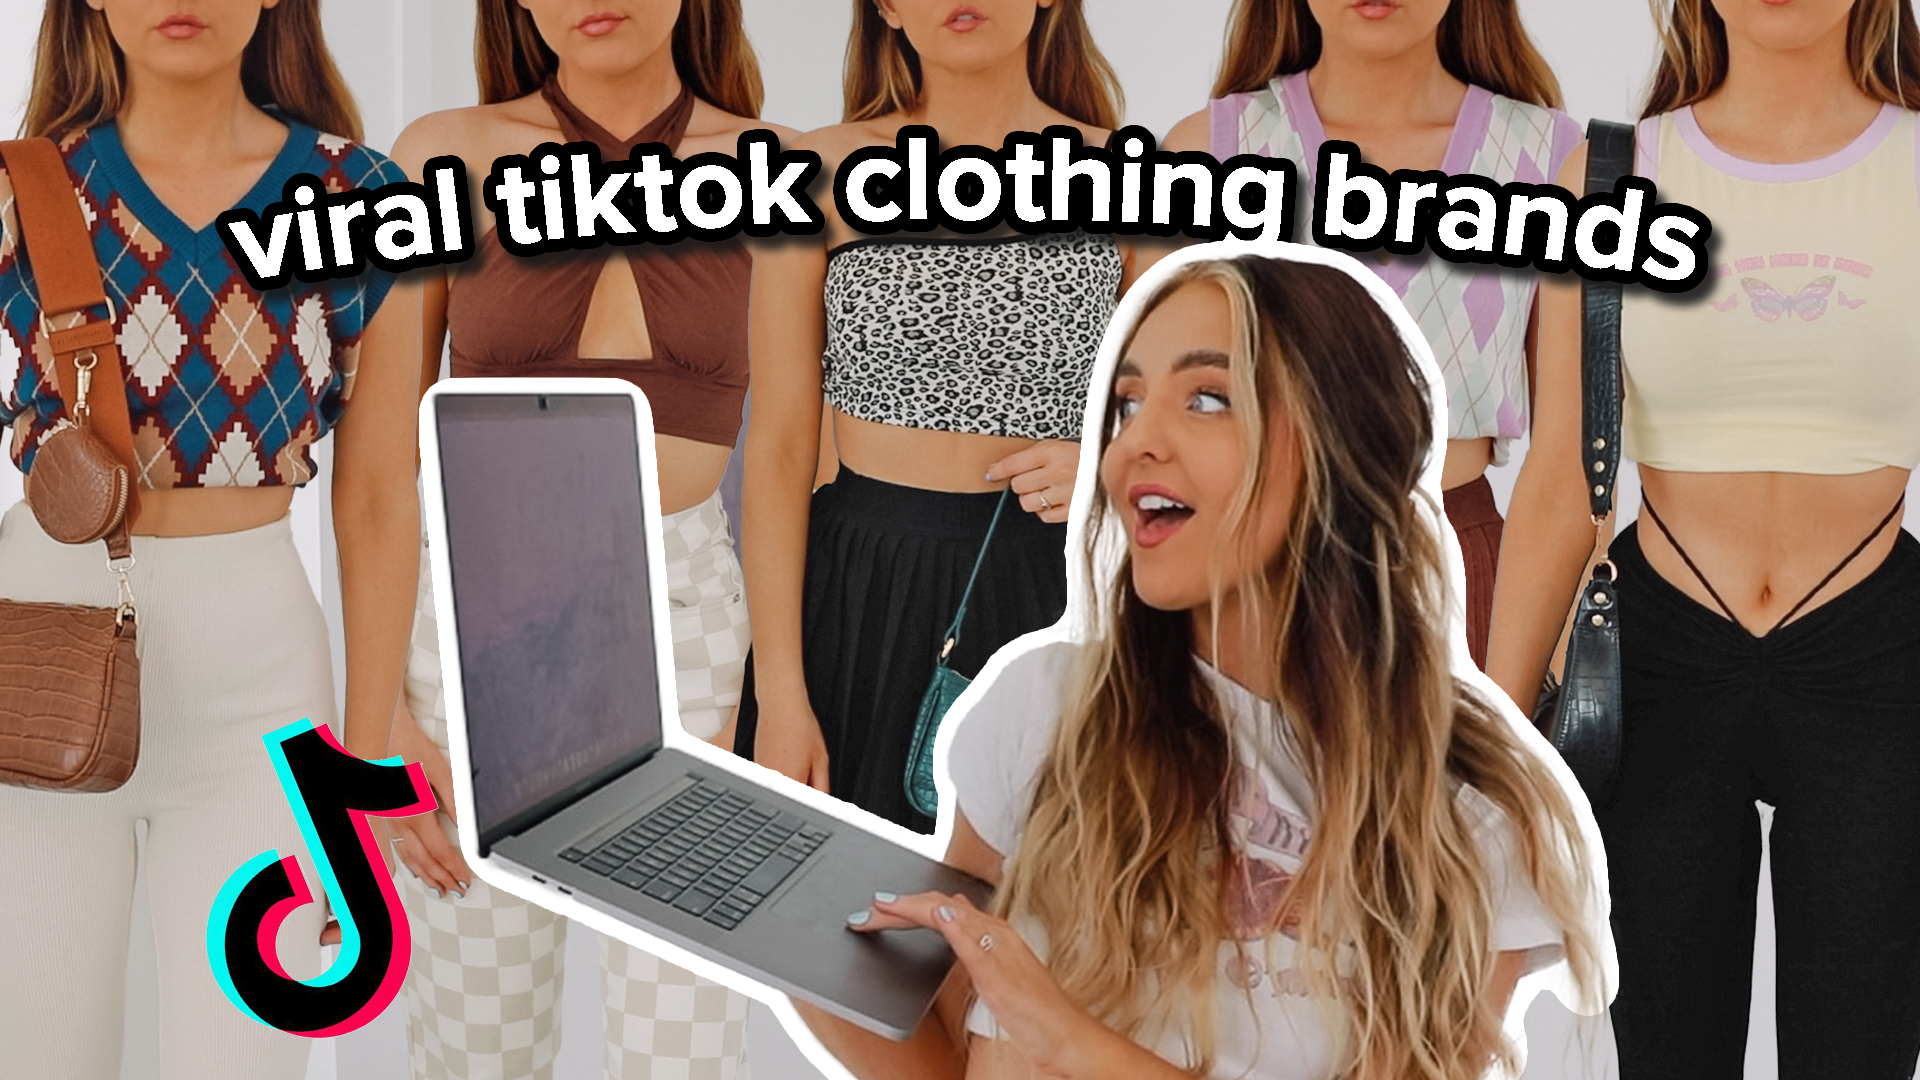 Sarah Betts on X: shopping from VIRAL tiktok clothing brands to